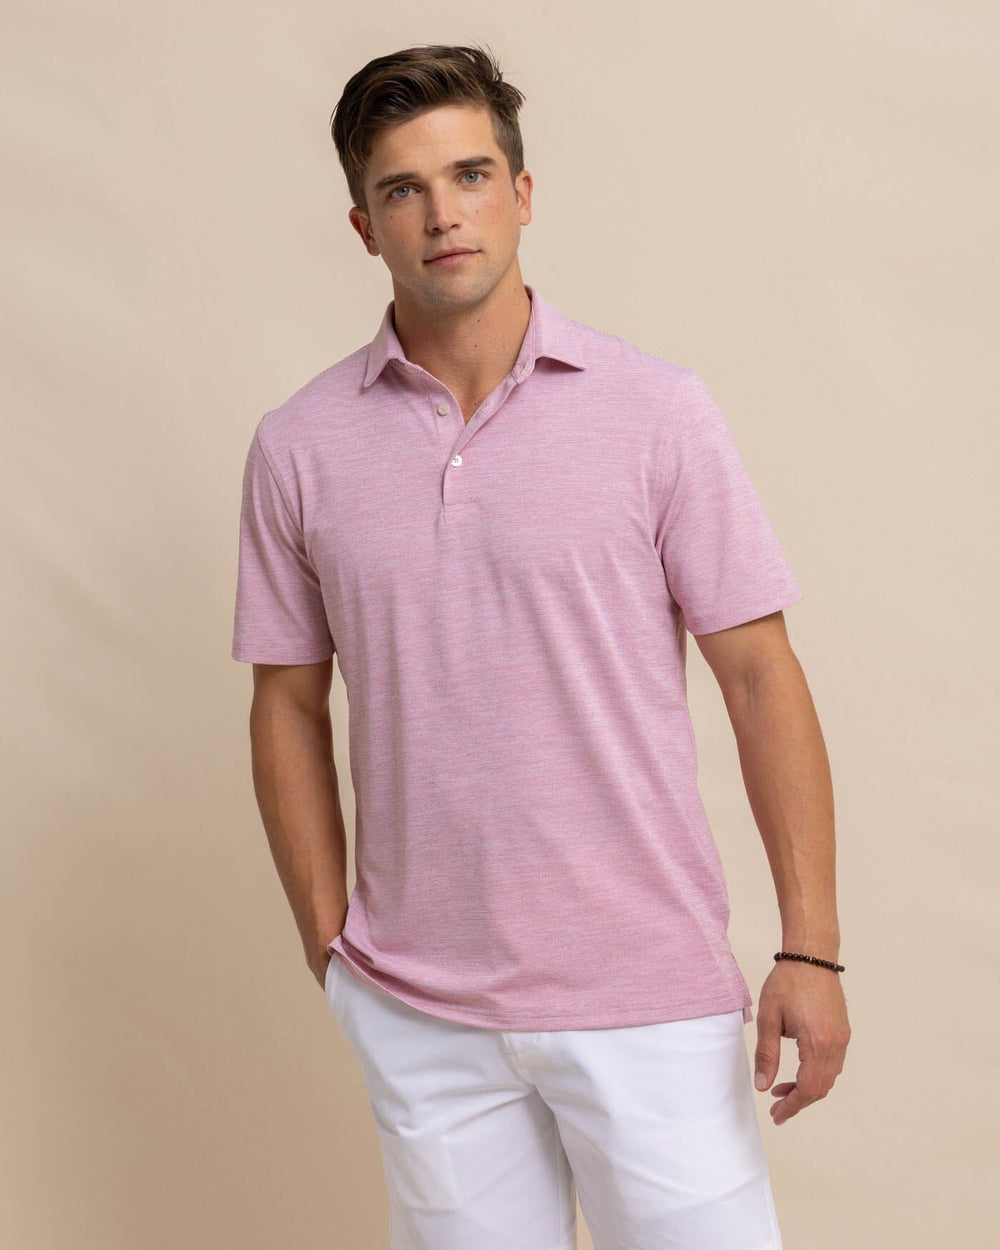 The front view of the Southern Tide Team Colors Driver Spacedye Polo Shirt by Southern Tide - Crimson